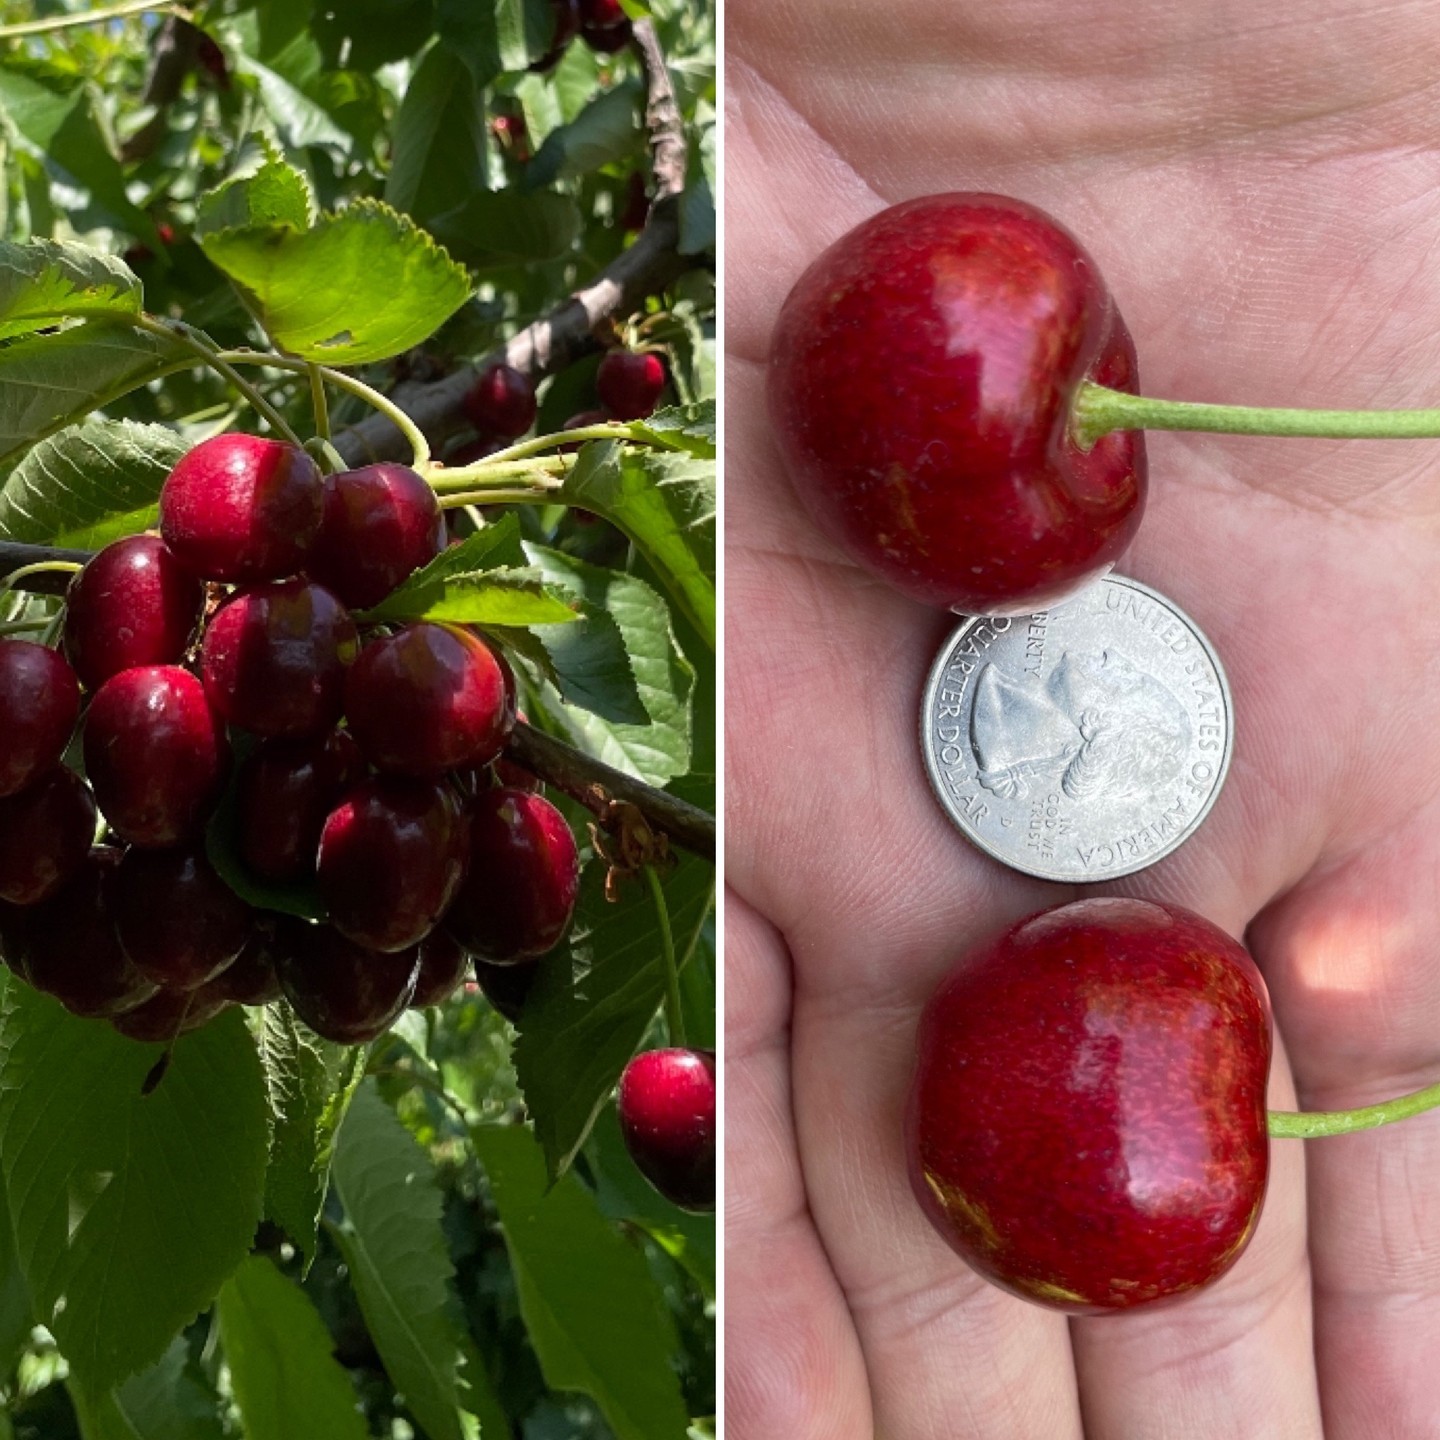 It's going to be a BIG northwest cherry season! Look at the size of these sweet cherries. Cherry season is only ONE WEEK AWAY! 🍒🍒🍒